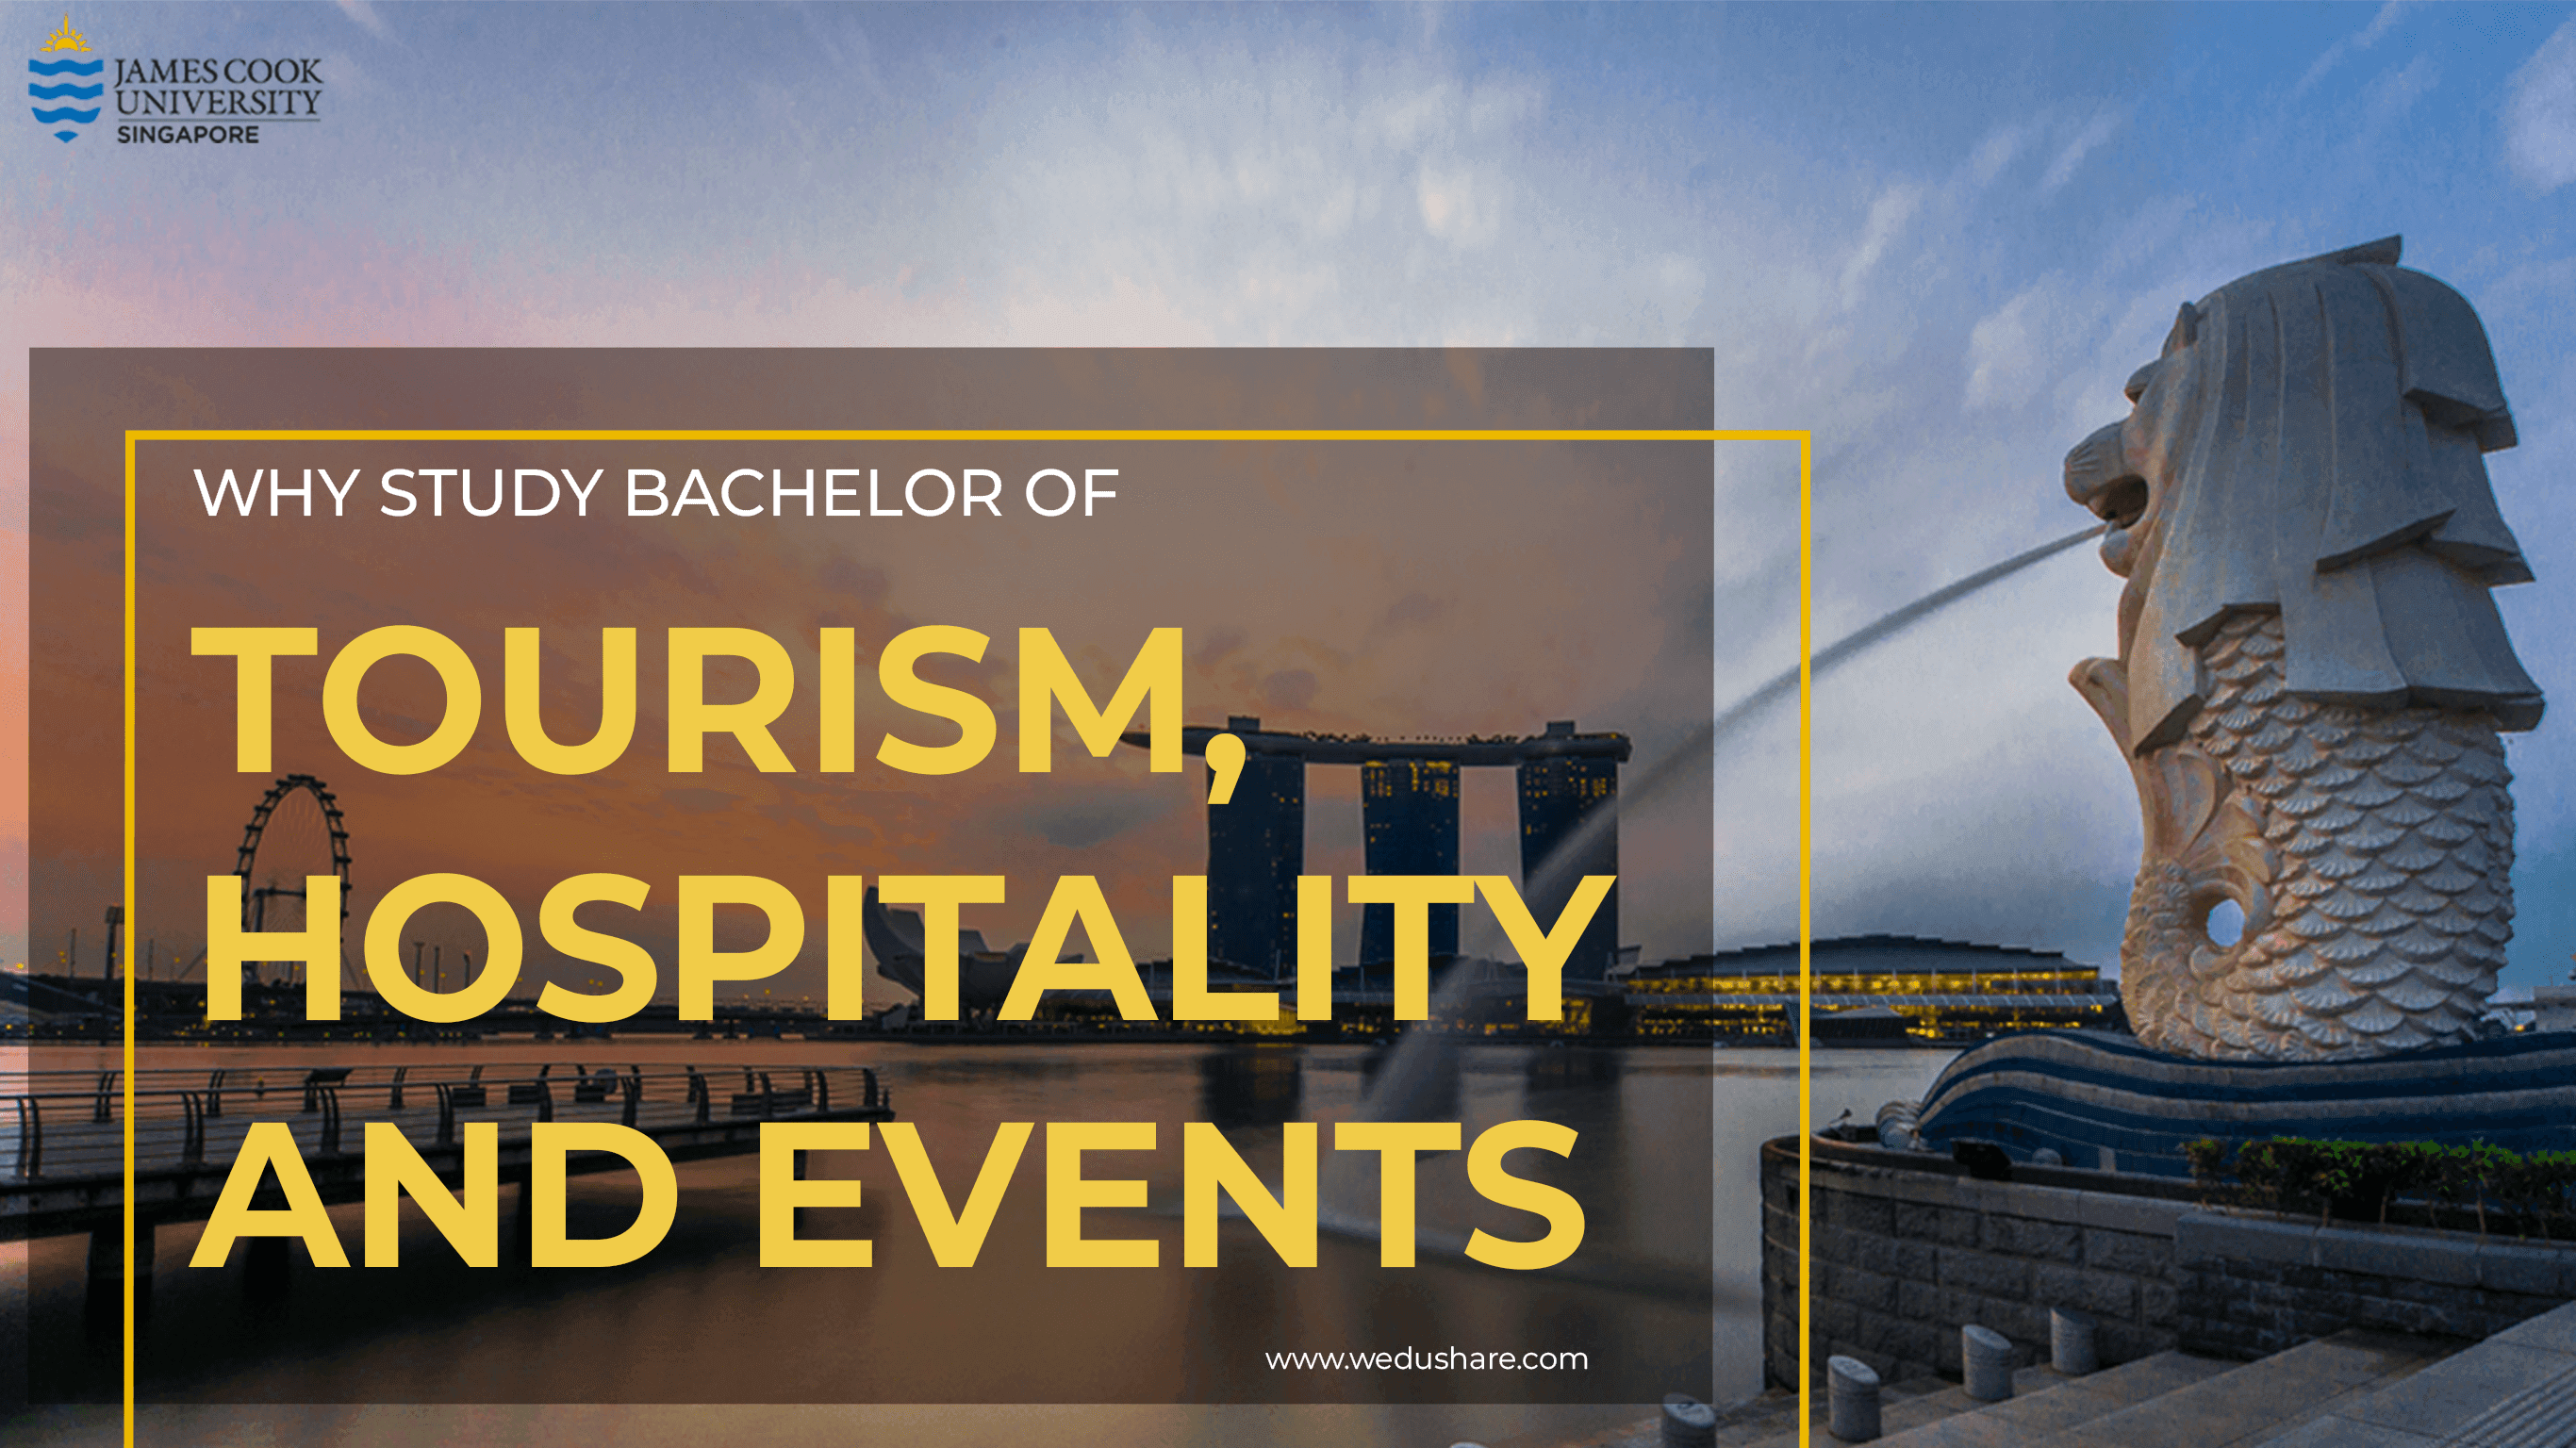 Why Students Should Study Bachelor of Tourism, Hospitality and Events